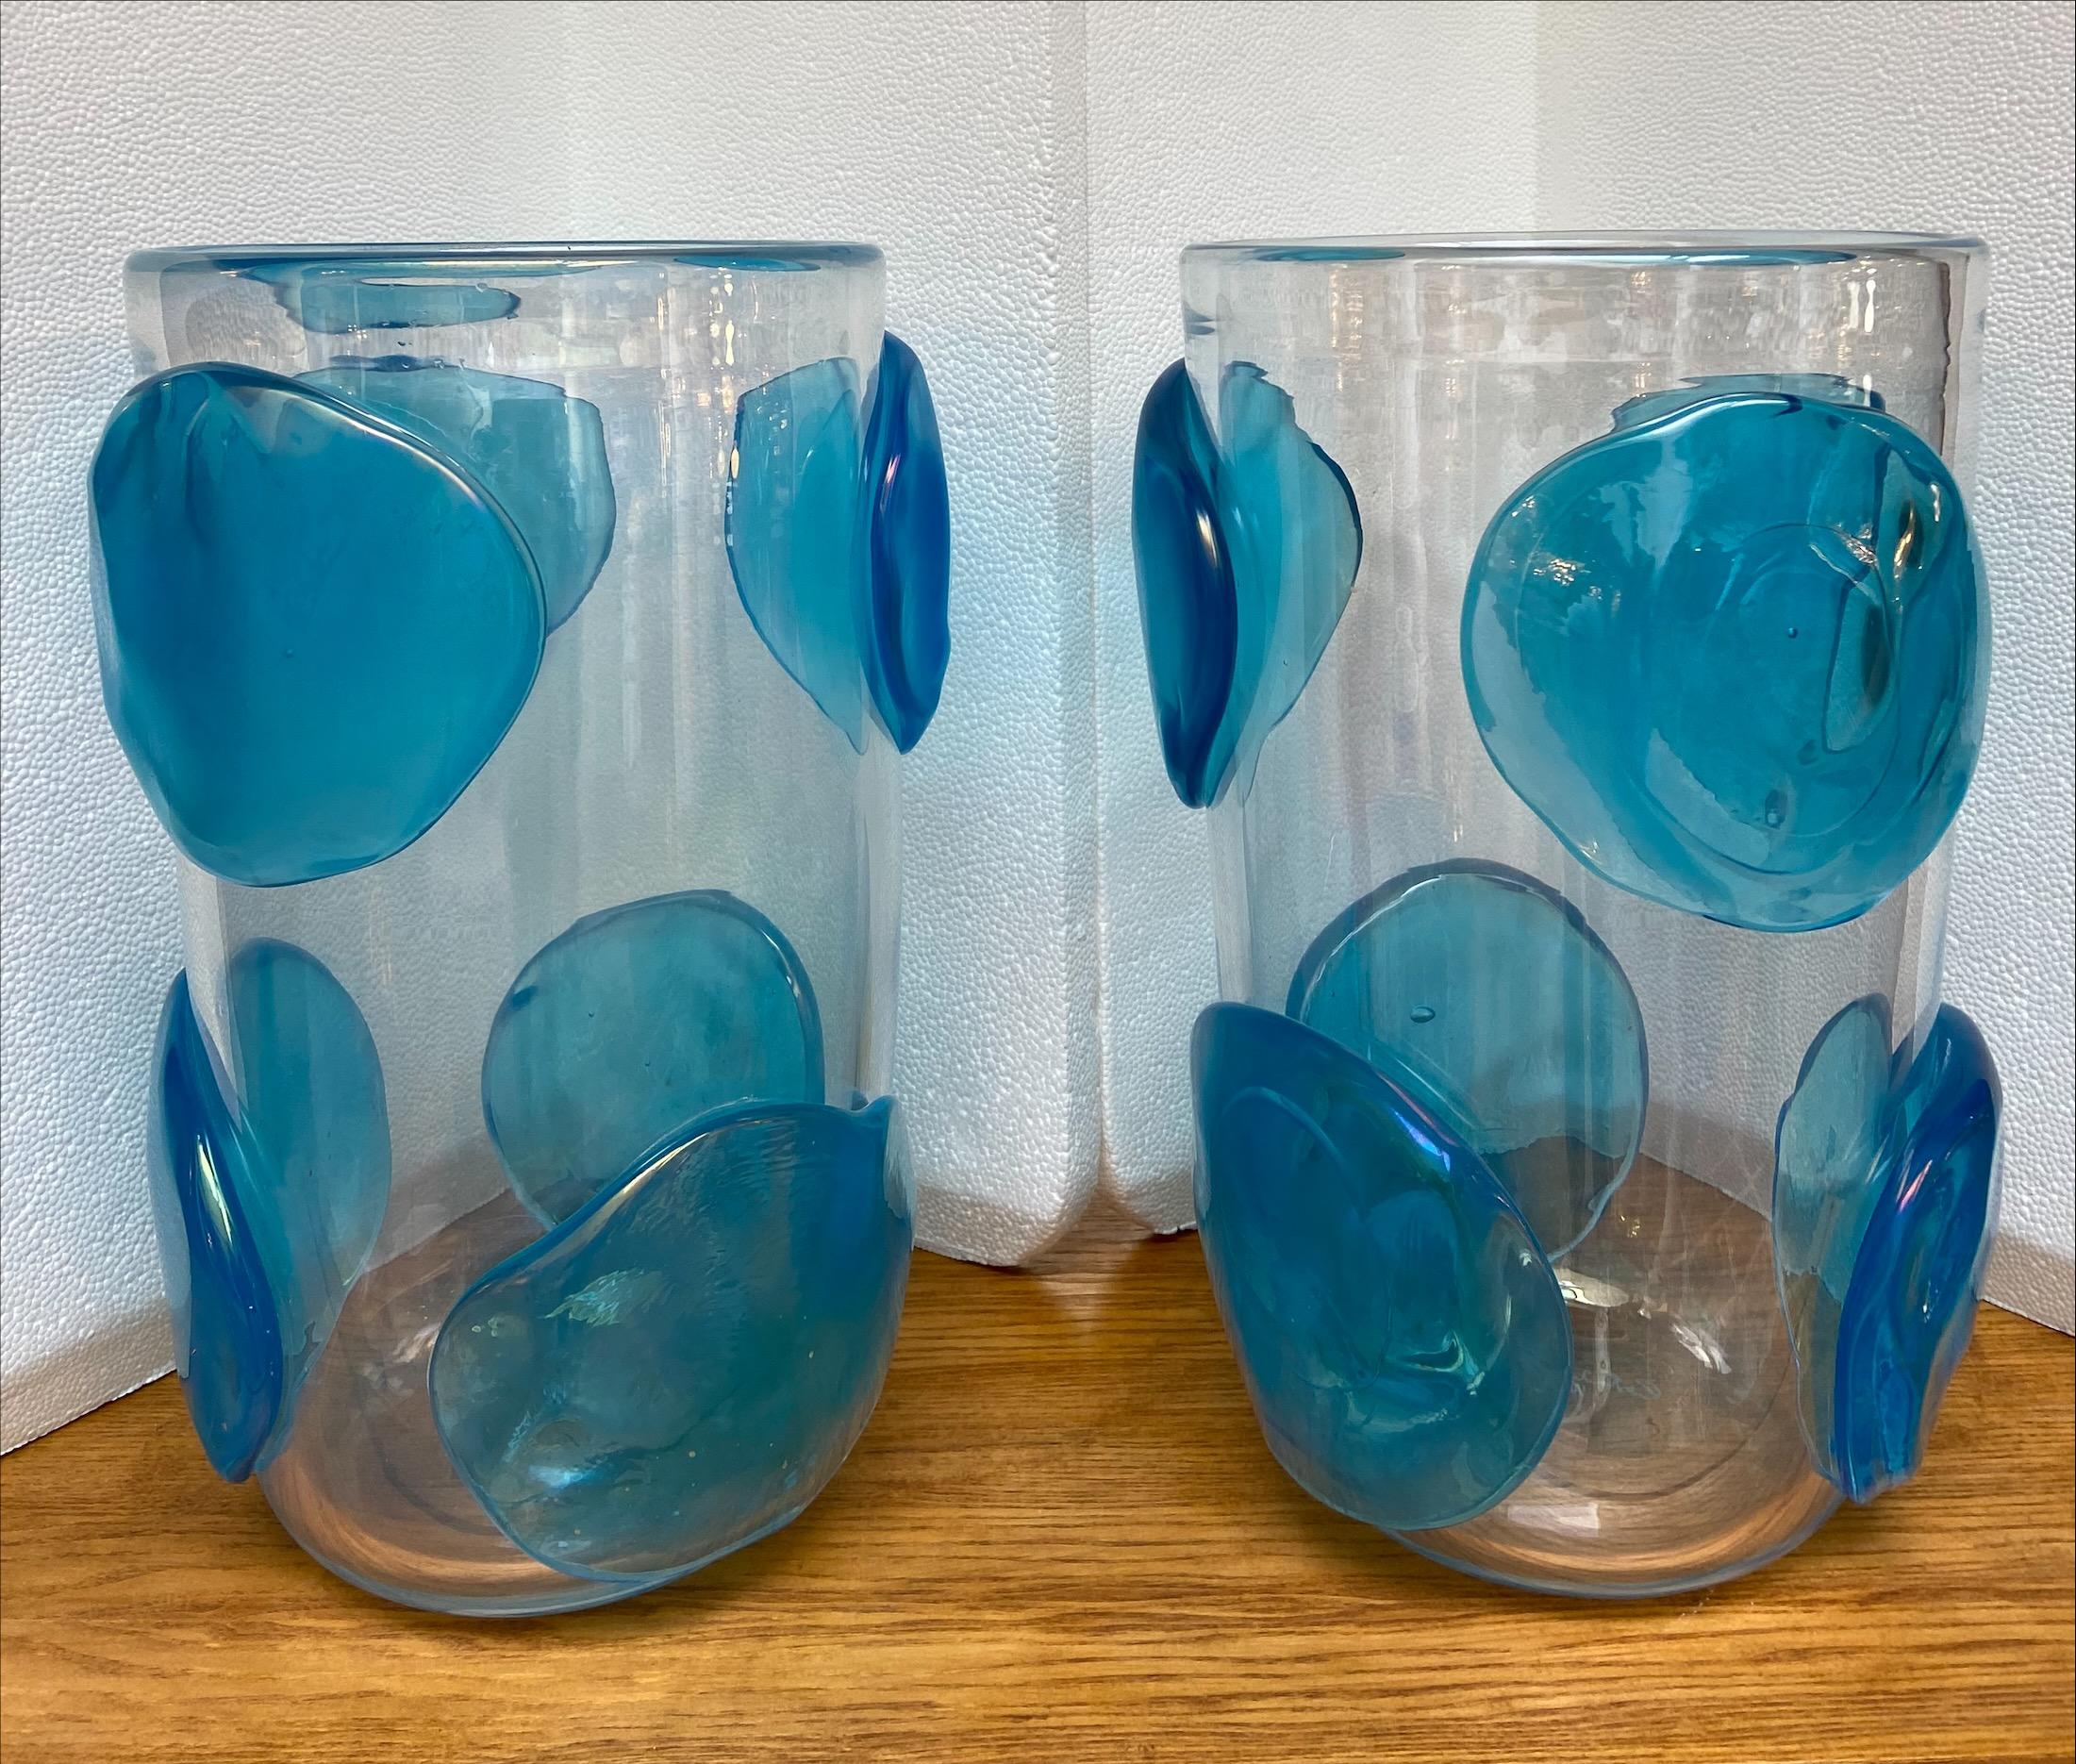 Pair of vases - Costantini - Murano - circa 1980
Murano glass
Signed
Large blue matt glass pellets on transparent vase body
H 38 x D 21.5cm
In a perfect state.